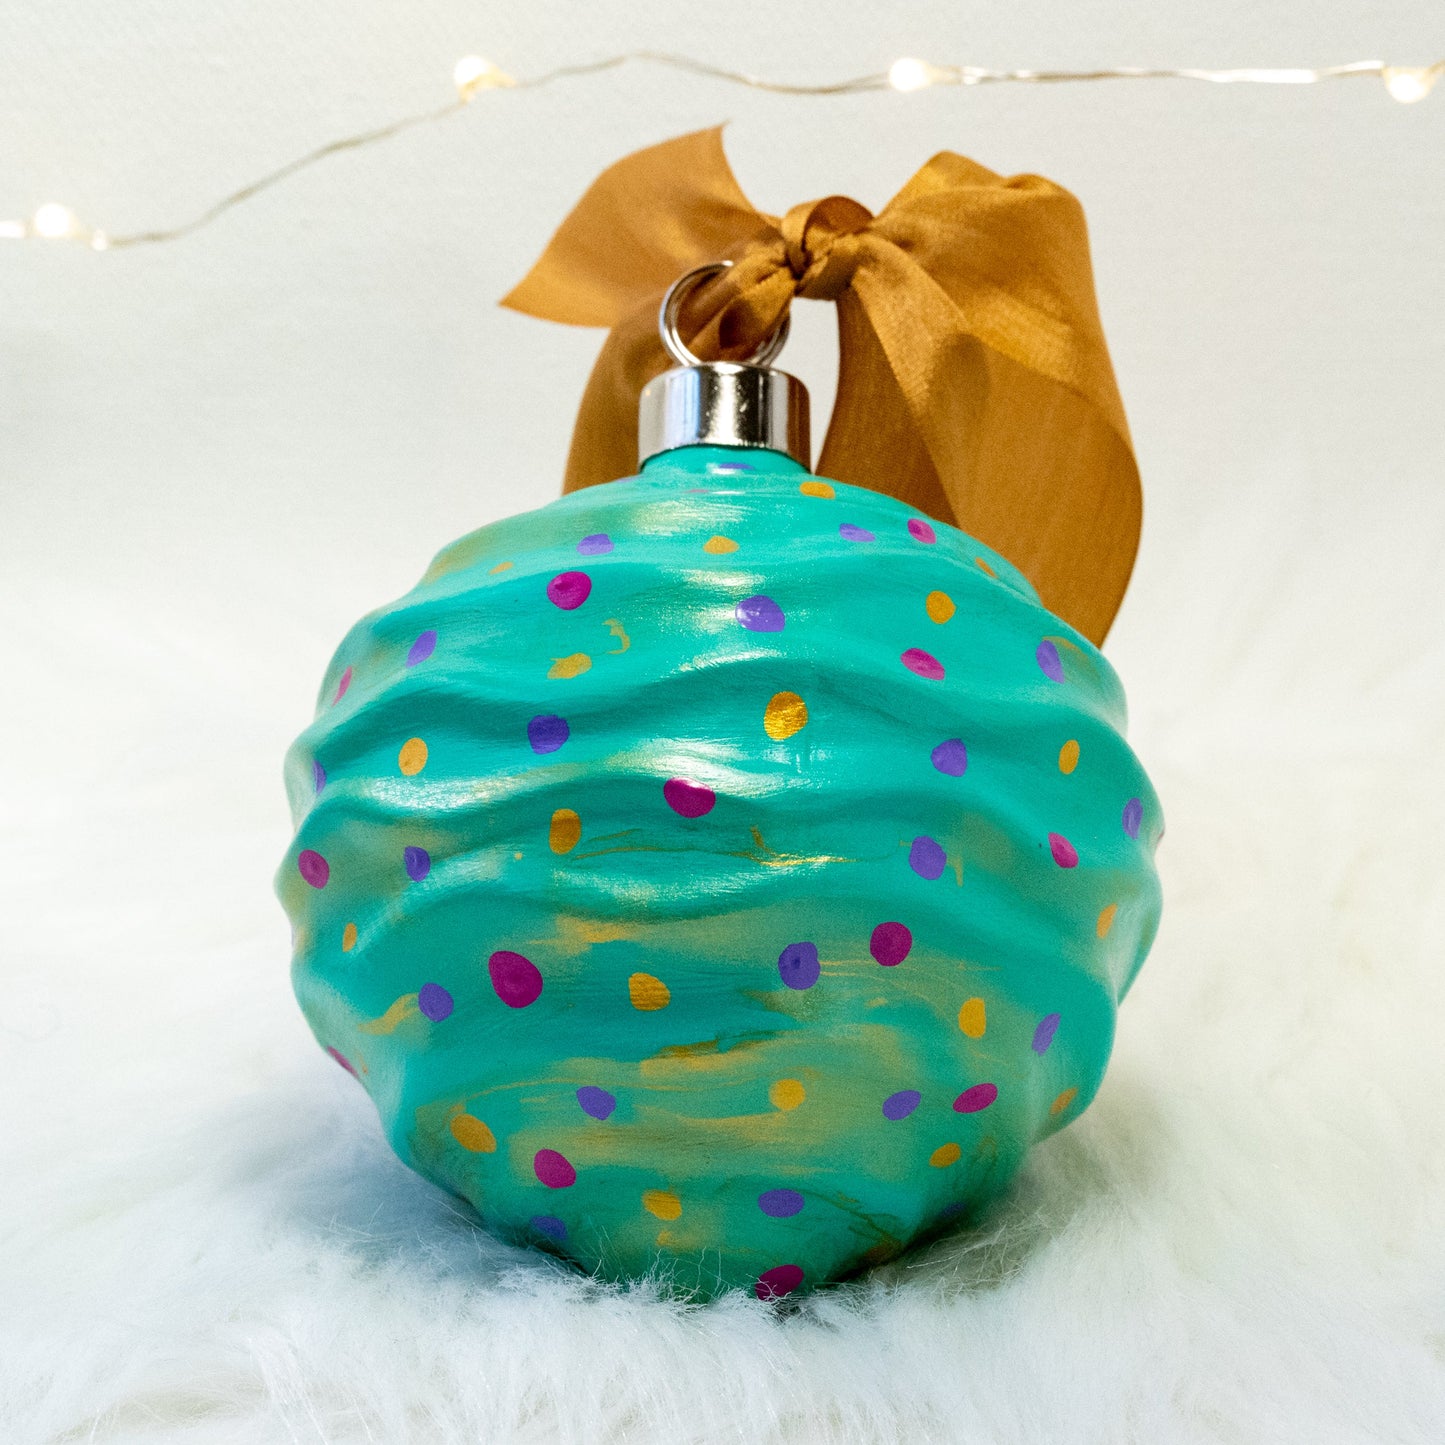 The Trina Hand Painted Ornament features a bright aqua green base coat with fuchsia, purple and gold polka dots and gold accents. Painted using fluid acrylic and acrylic paints. Displayed on white faux fur with fairy lights in the background.